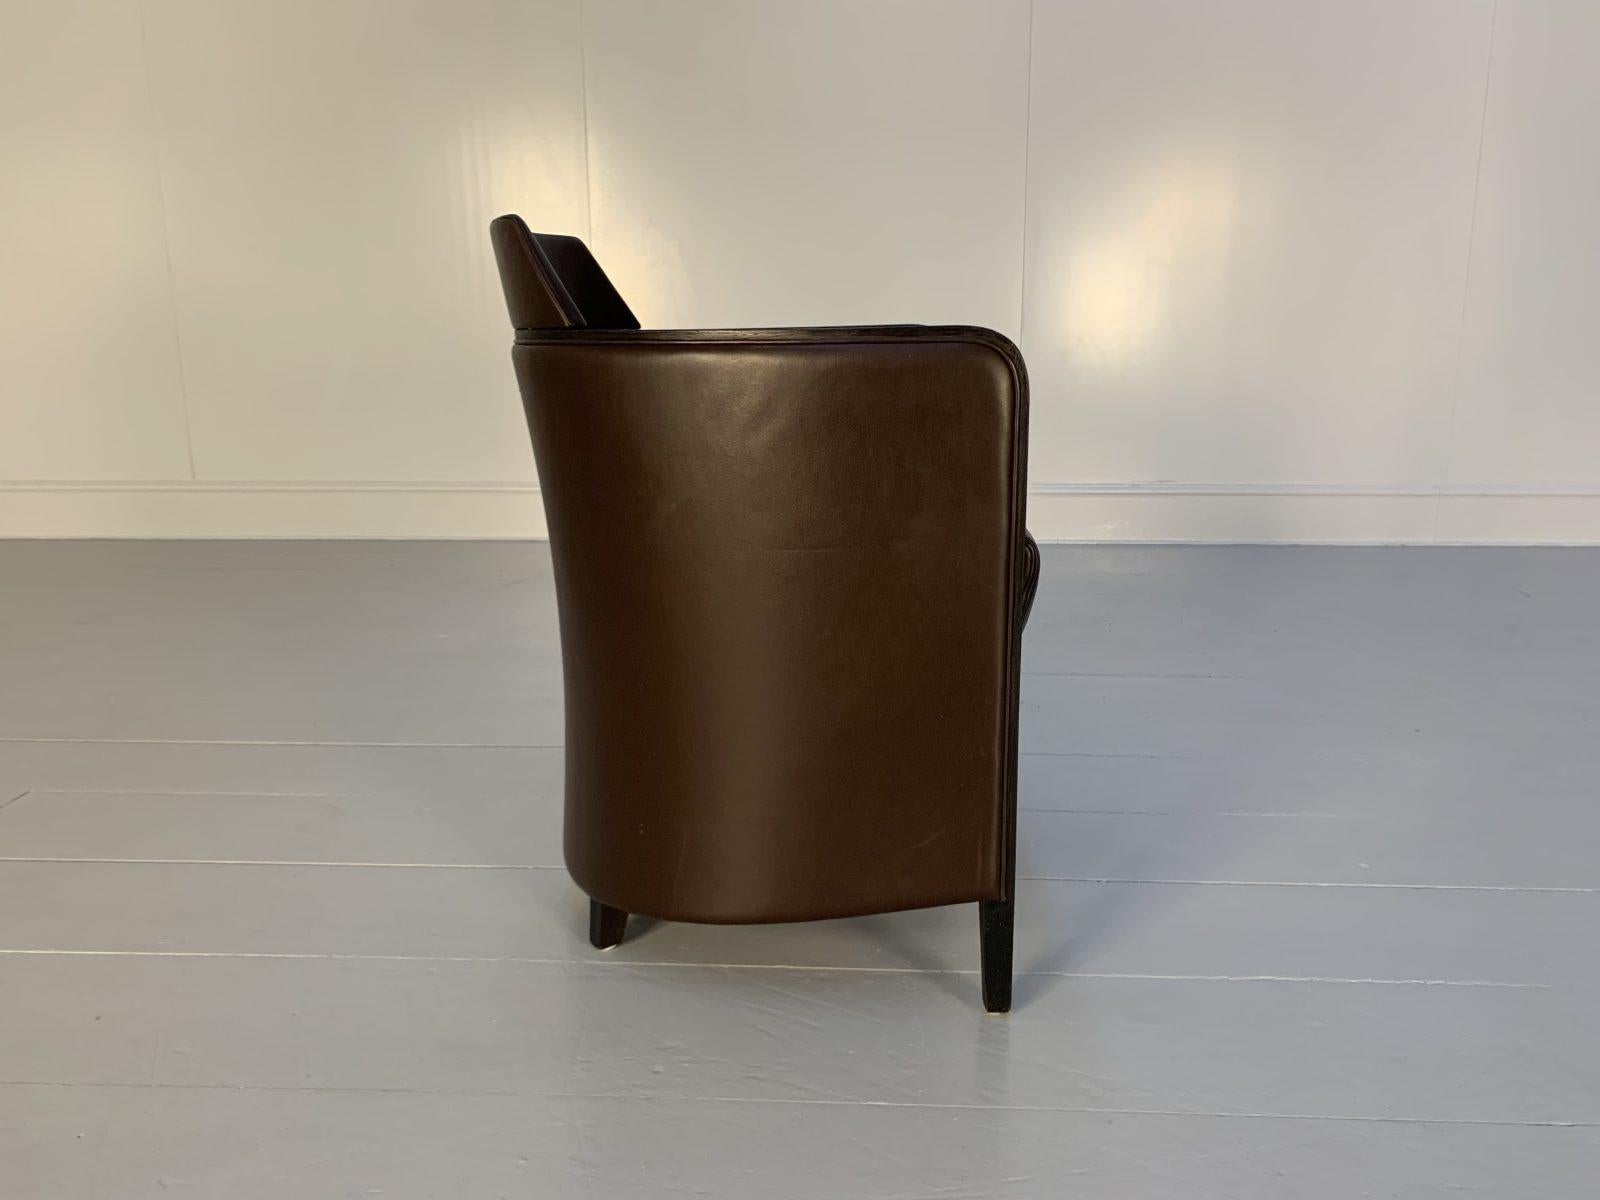 Moroso “Miss” Armchair, in Dark Brown Leather In Good Condition For Sale In Barrowford, GB